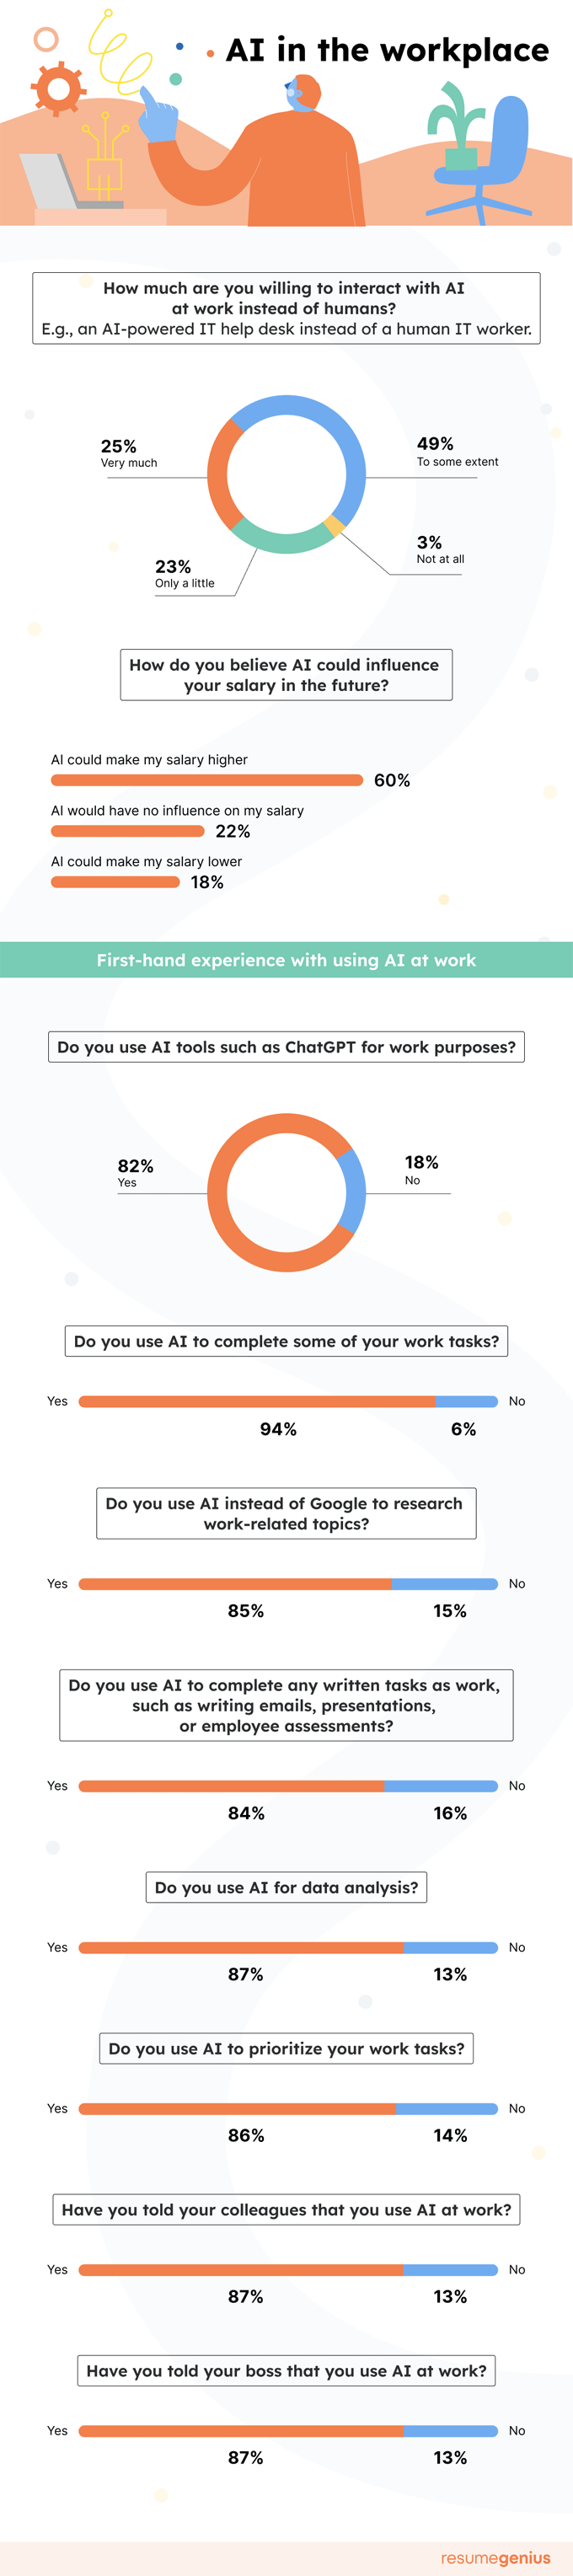 A graph showing people's opinions on using AI in the workplace.